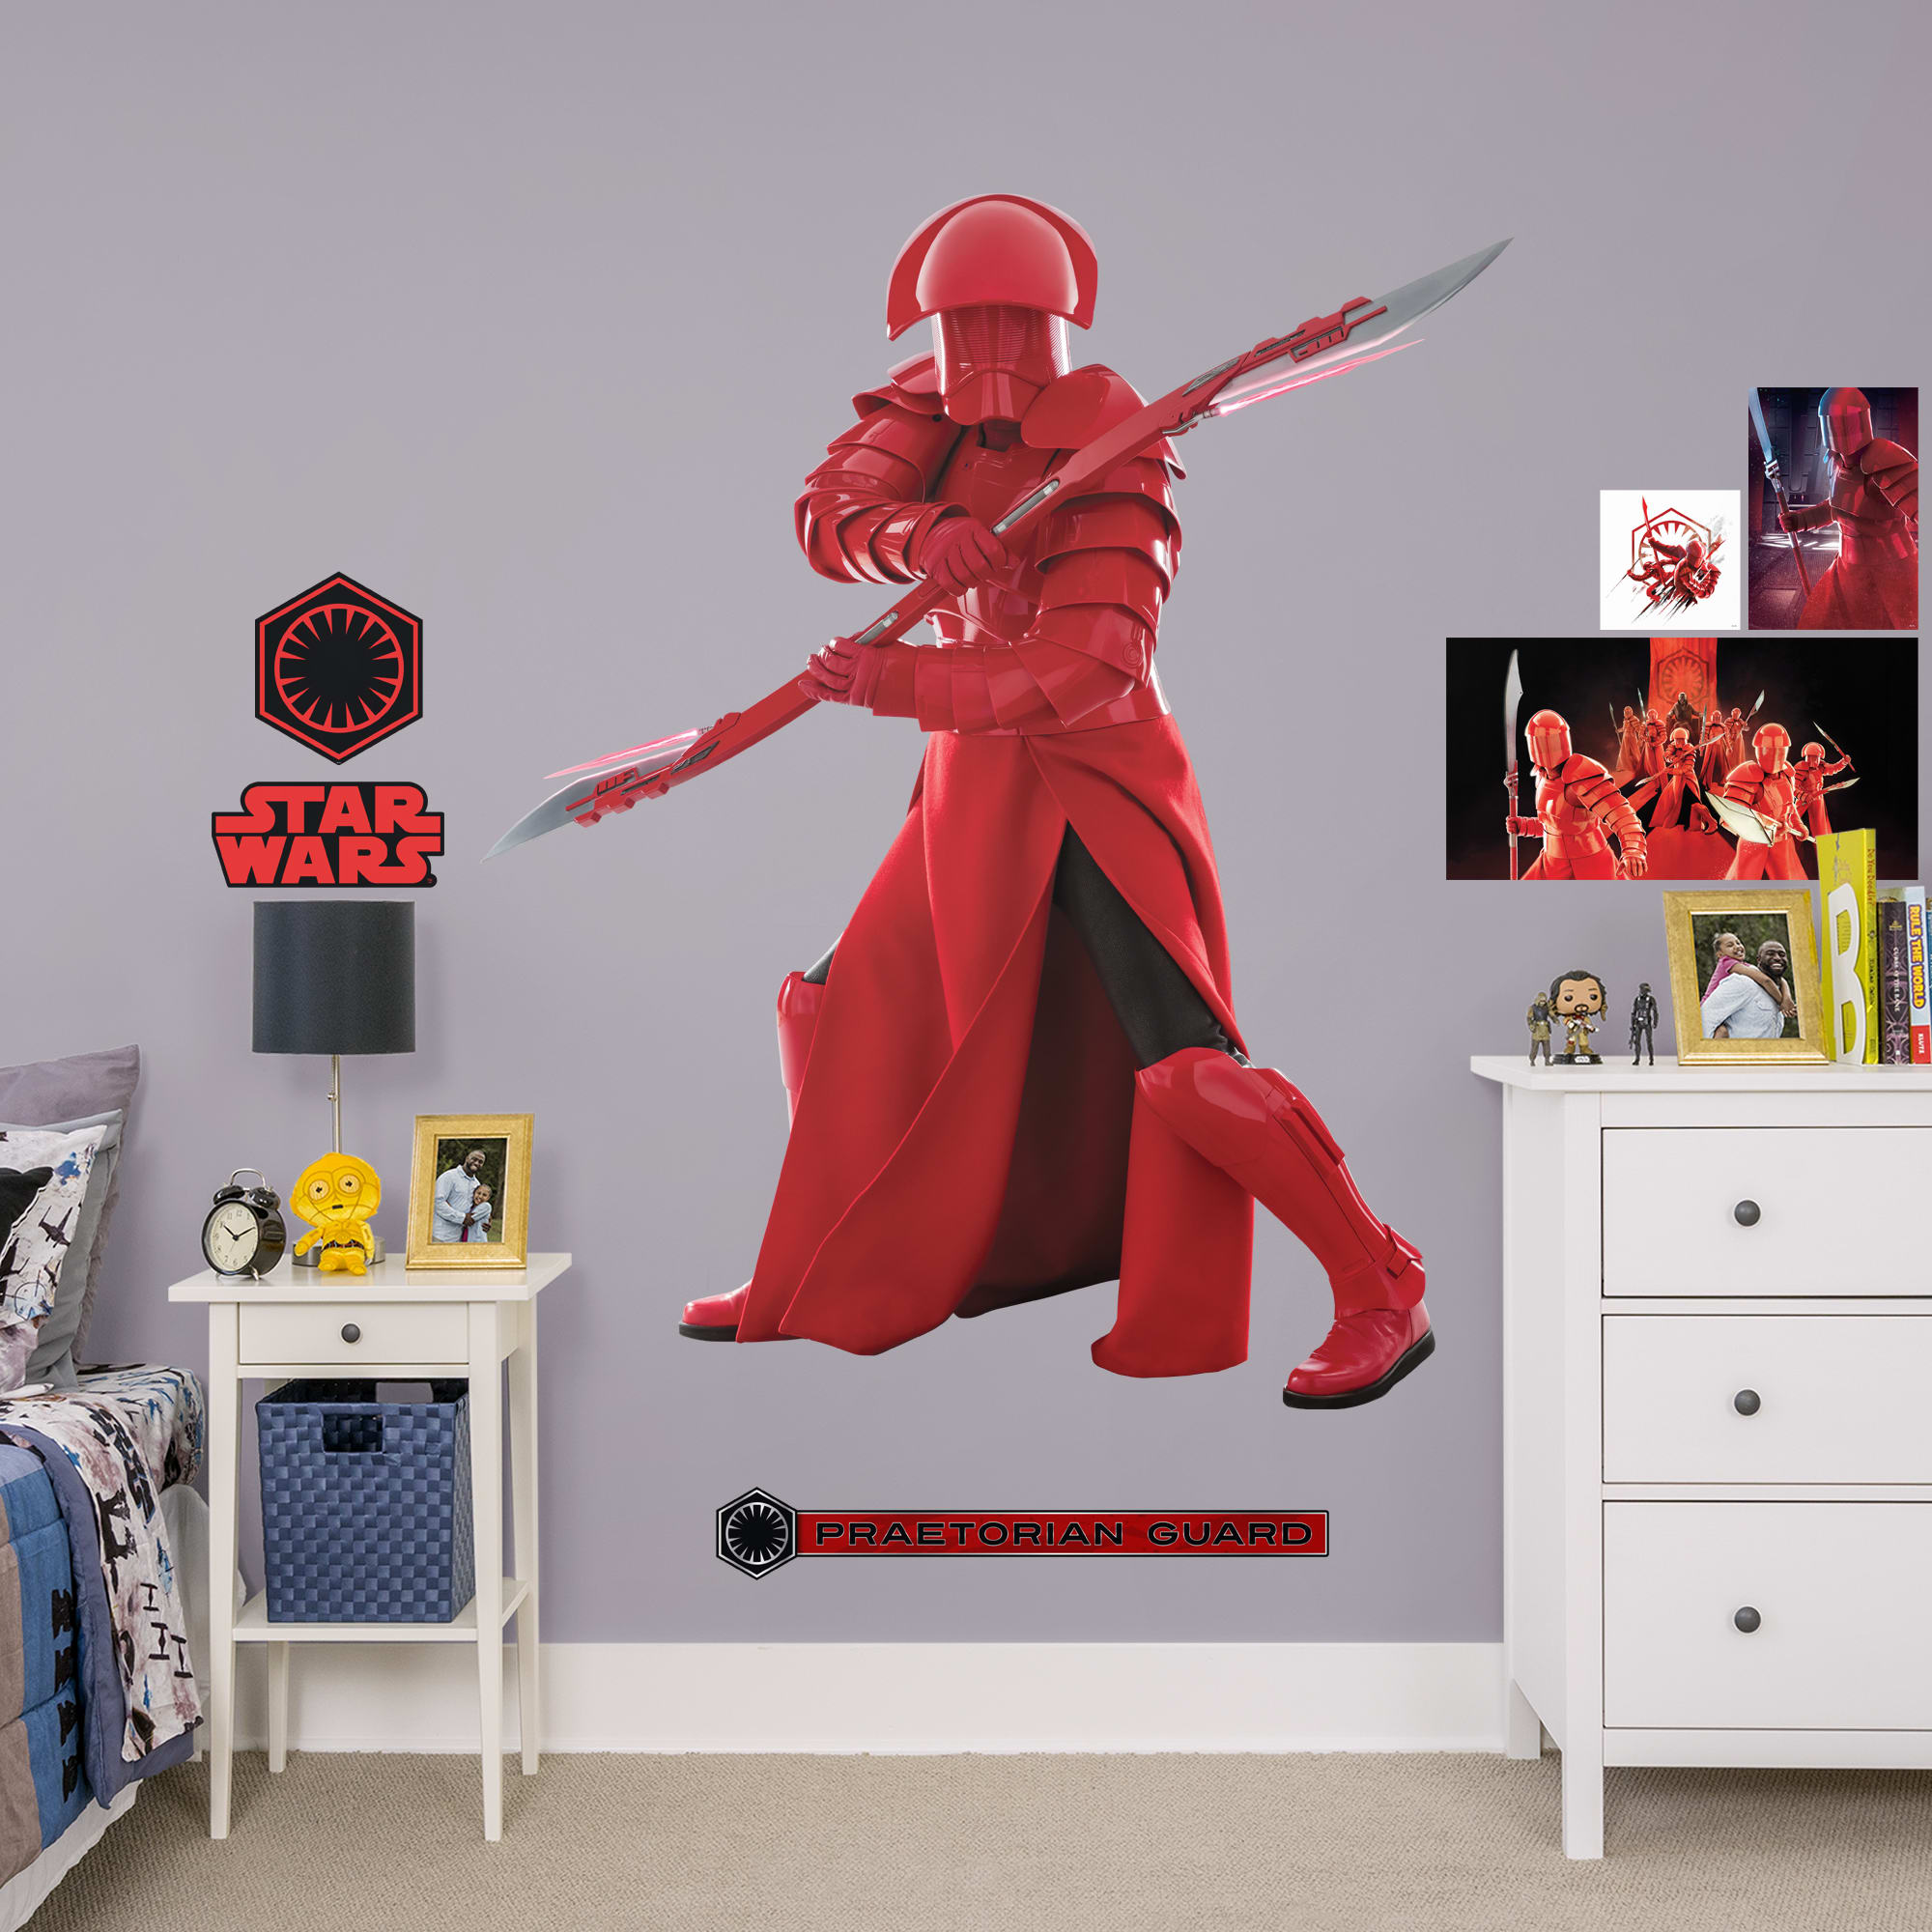 Praetorian Guard - Officially Licensed Removable Wall Decal Life-Size Character + 6 Decals (63"W x 74"H) by Fathead | Vinyl